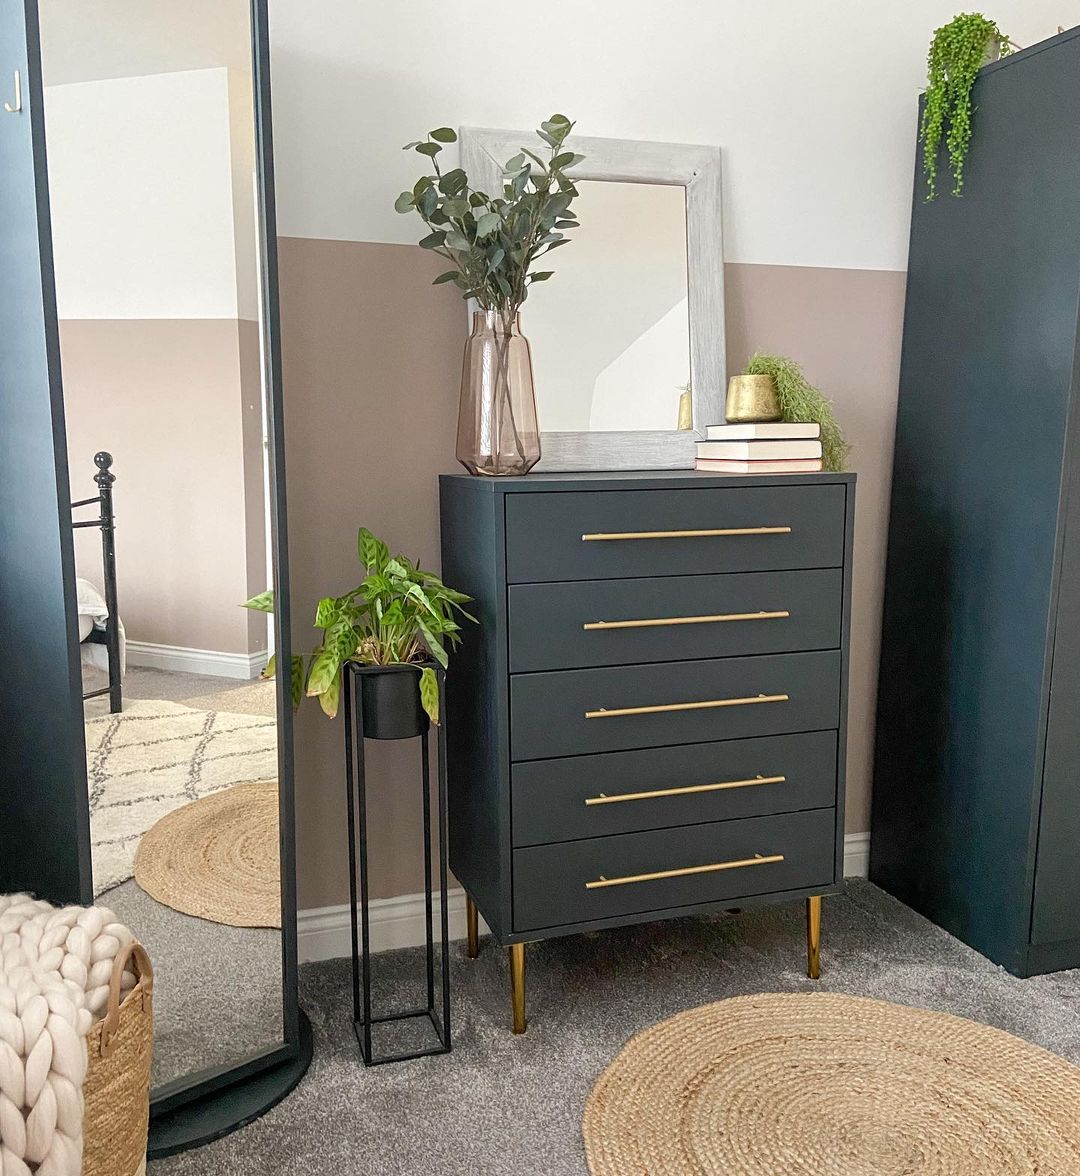 Painted chest of drawers in the bedroom. Photo by Instagram User @thenorthernhome_